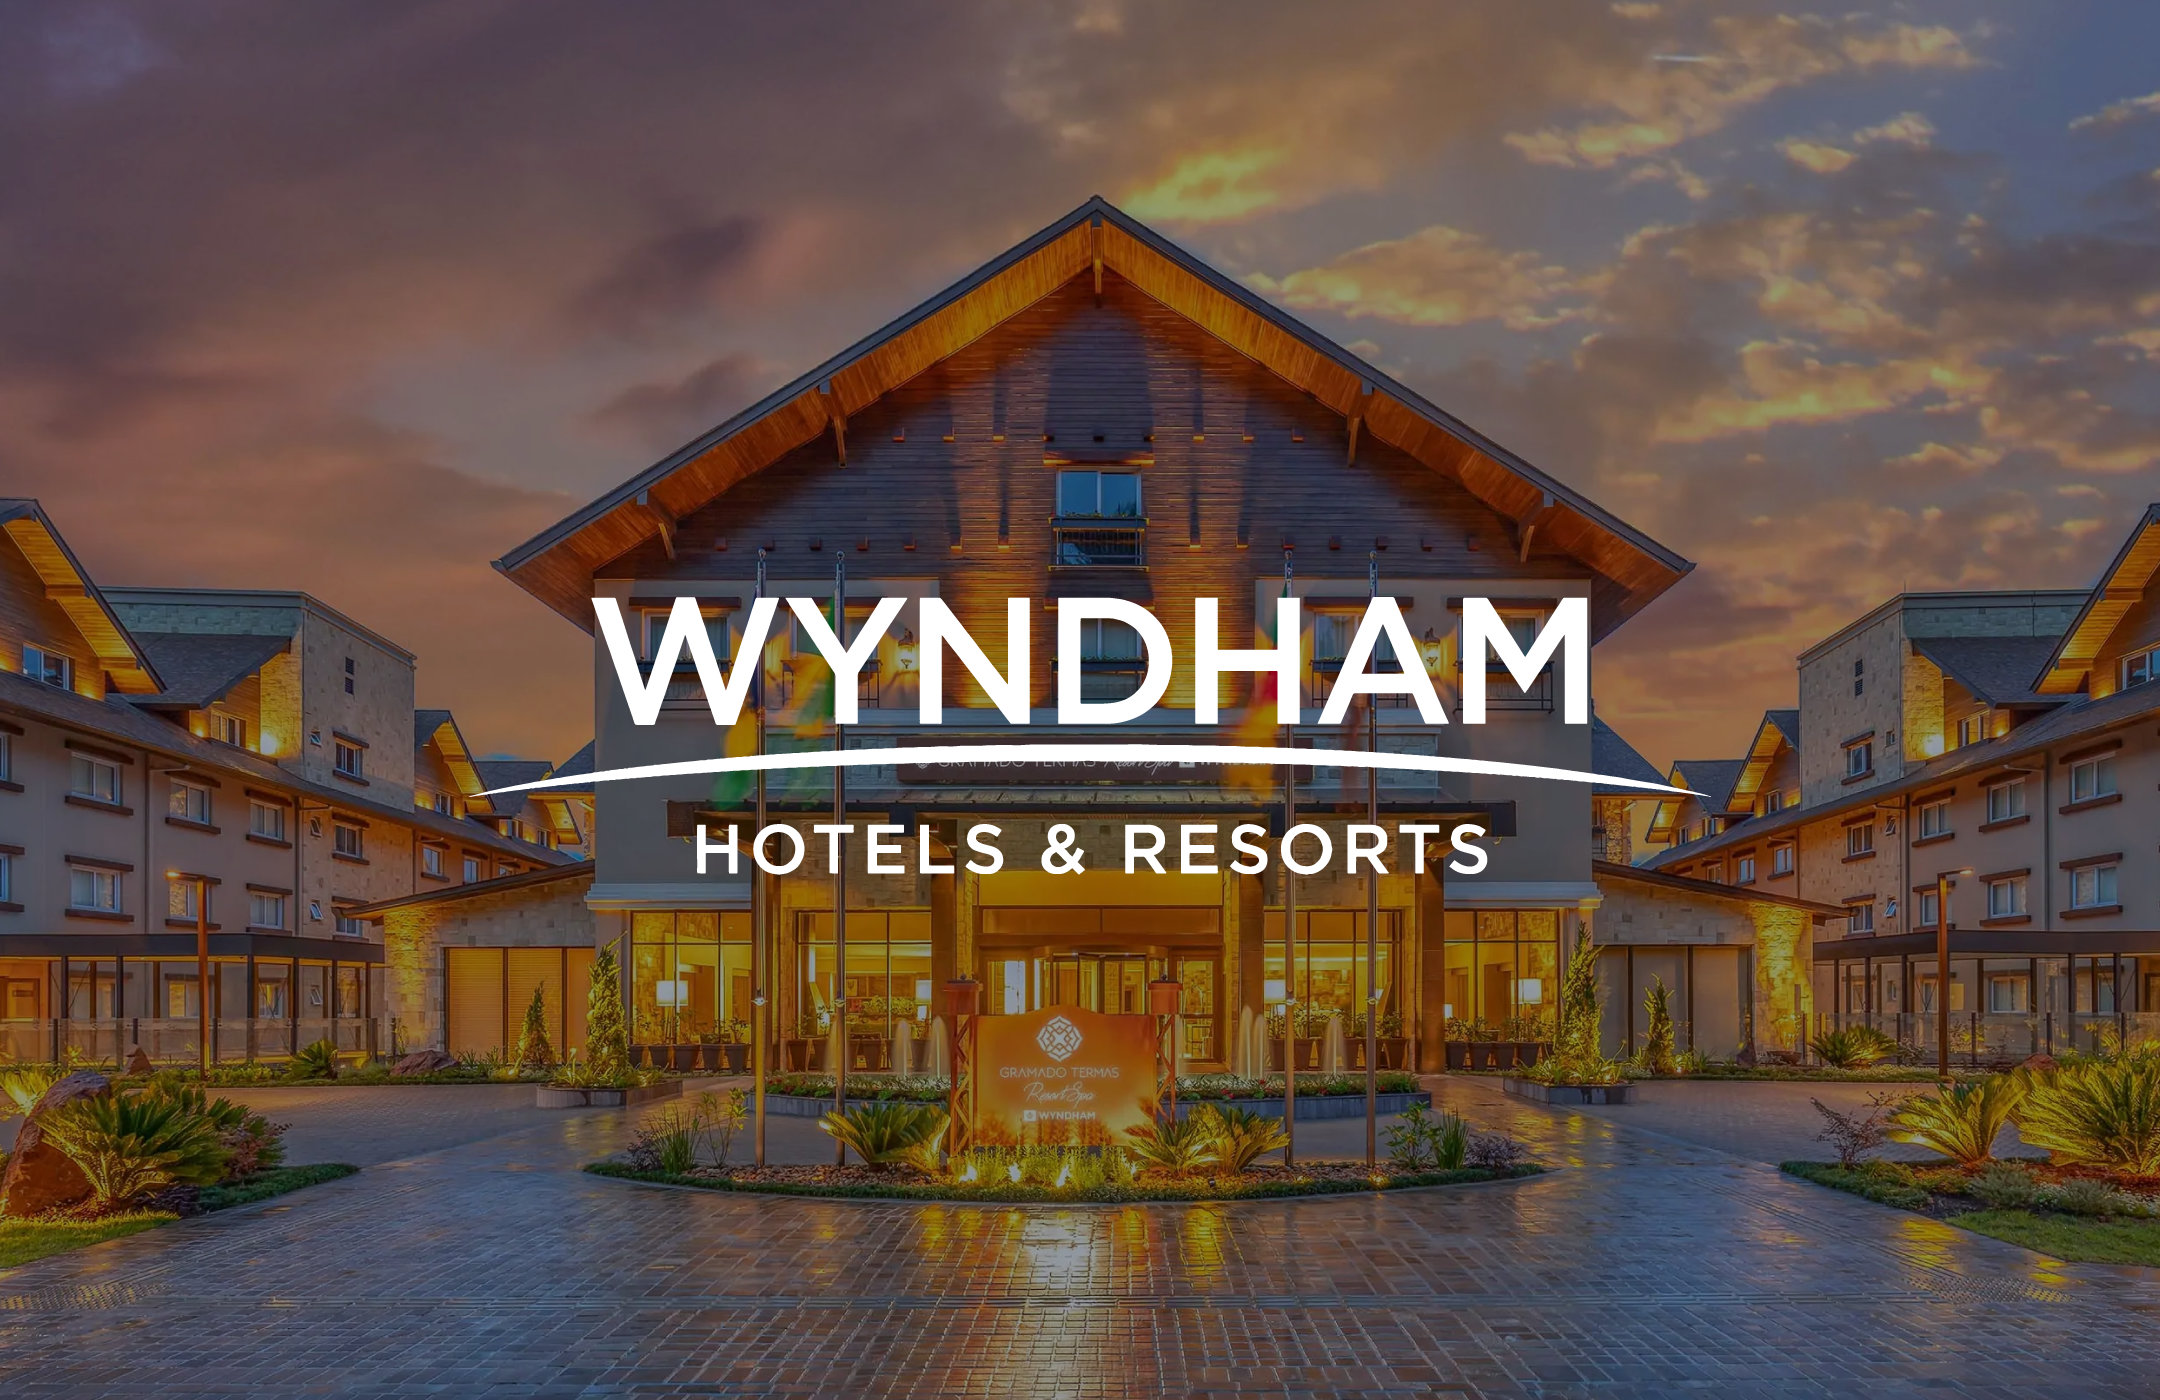 Wyndham Hotels logo overlaid on a photograph of one of their properties at sunset